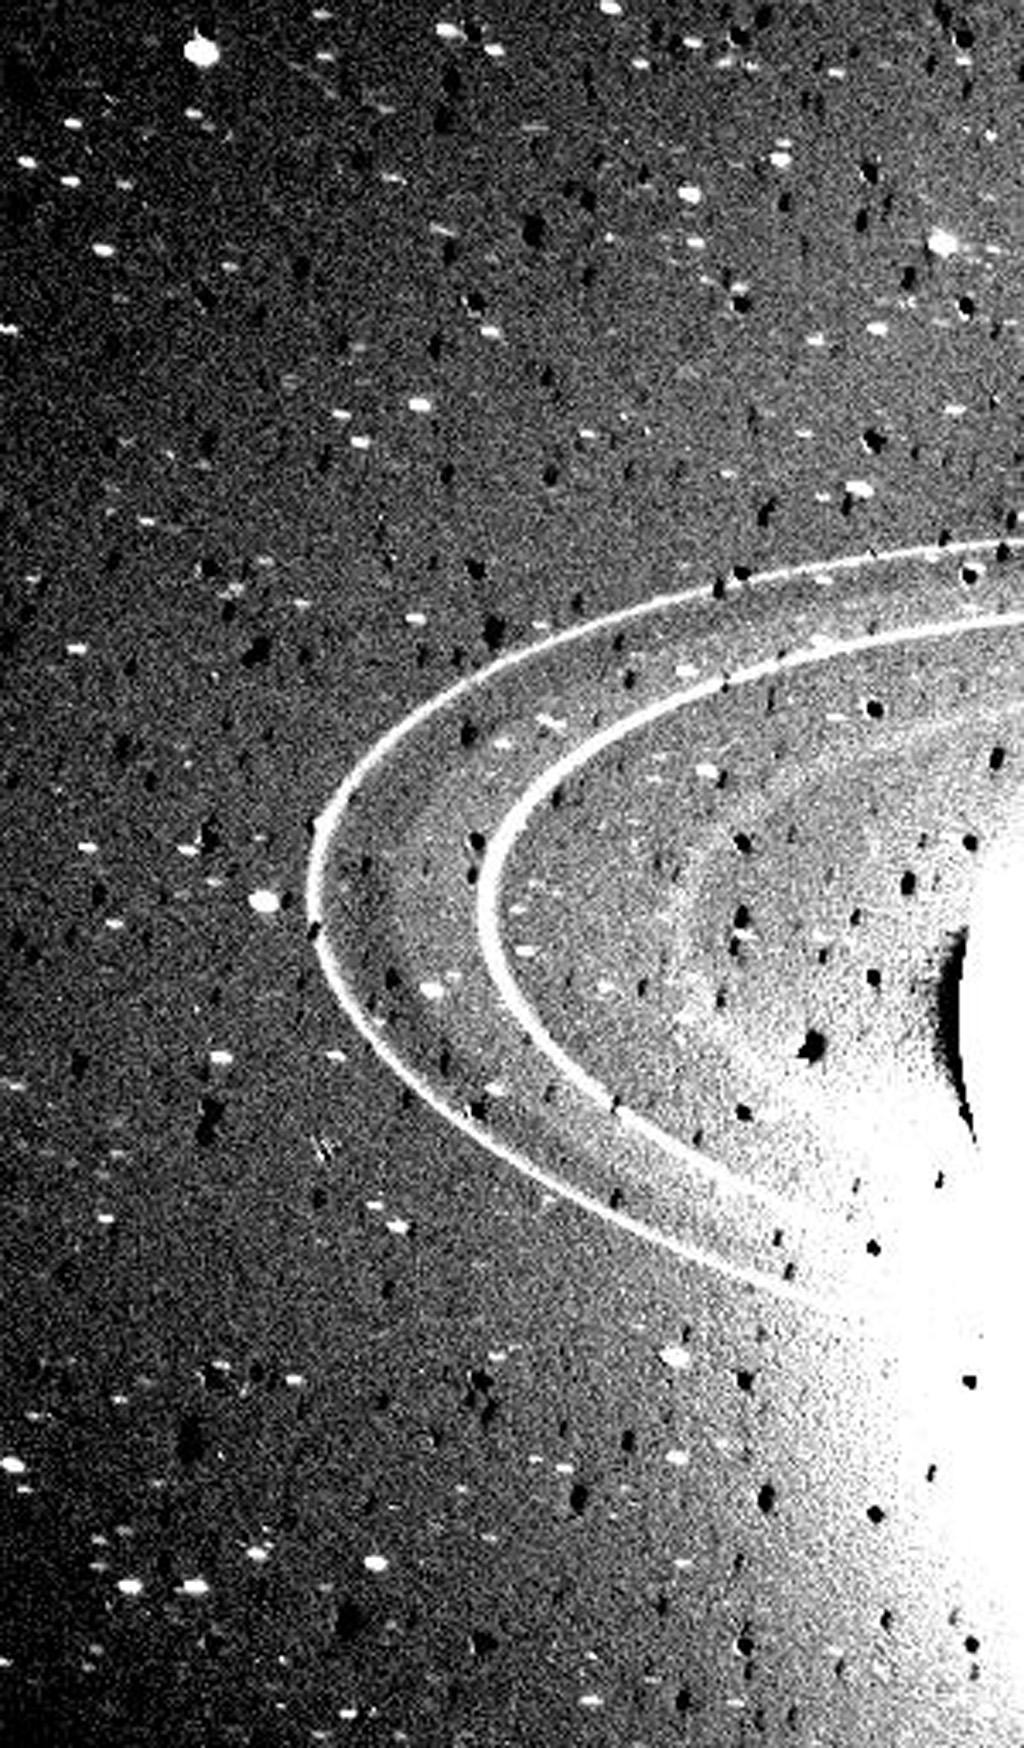 Image of Black and white image showing Neptune’s rings.